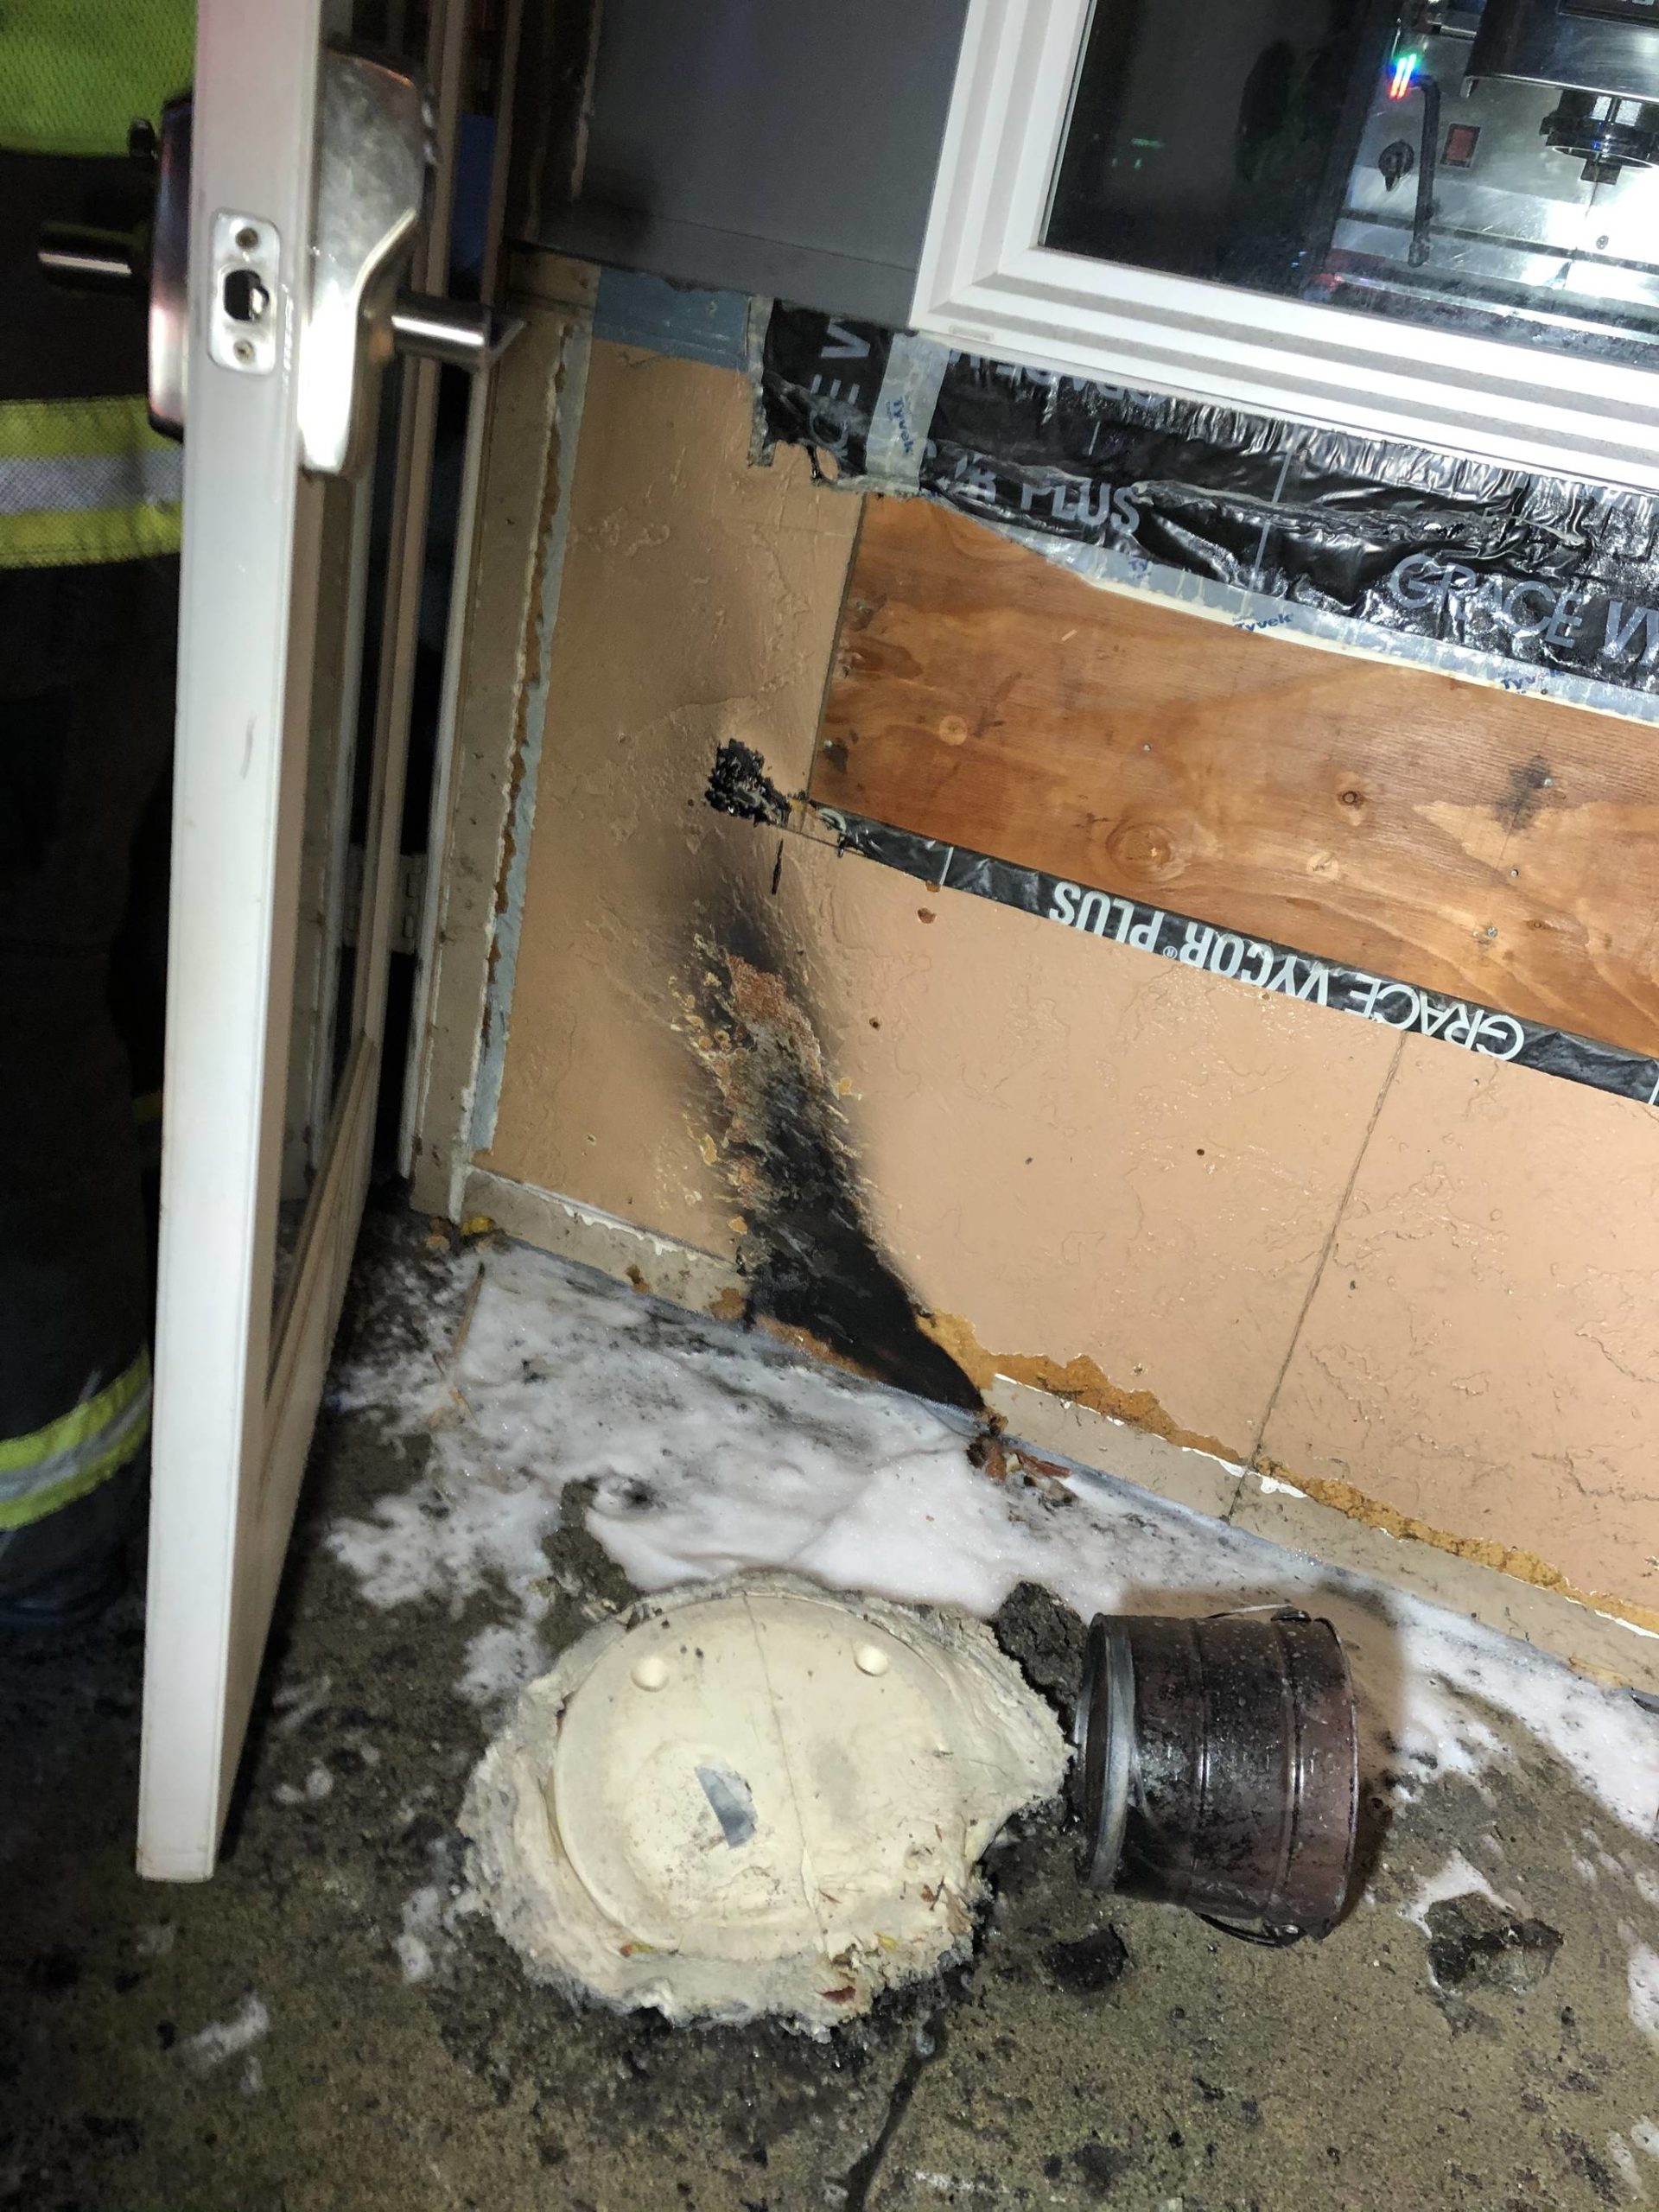 Capital City Fire/Rescue and the Juneau Police Department are investigating a fire that occurred near an apartment on Willoughby Avenue on Oct. 25, 2020 as arson. (Courtesy photo / CCFR)